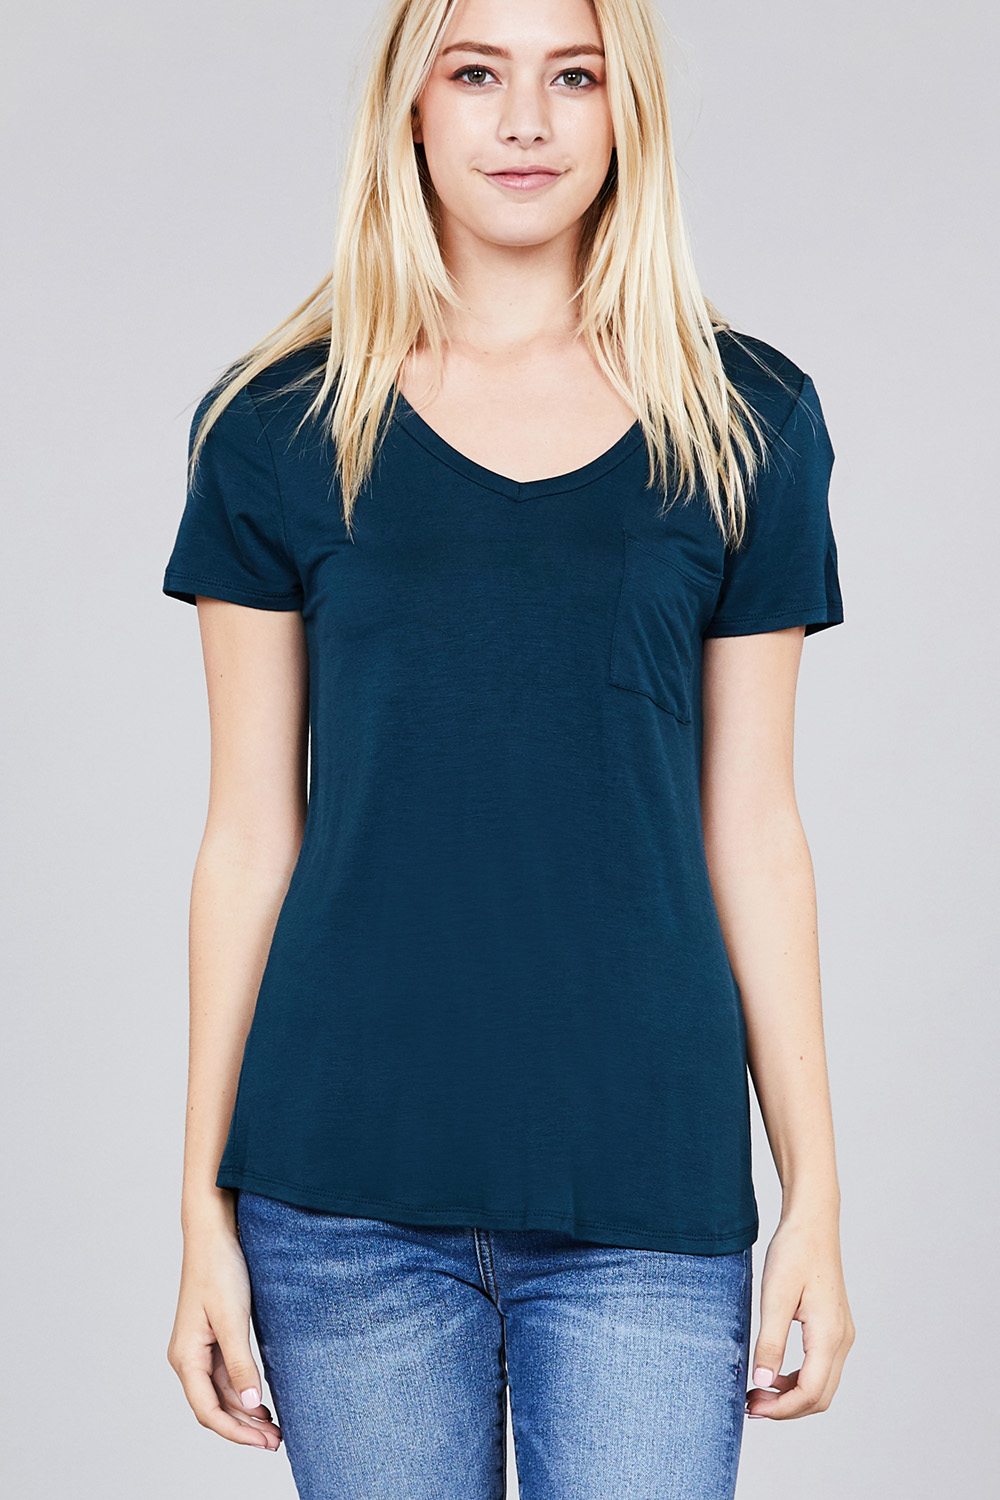 Teal V-neck Rayon Jersey Top